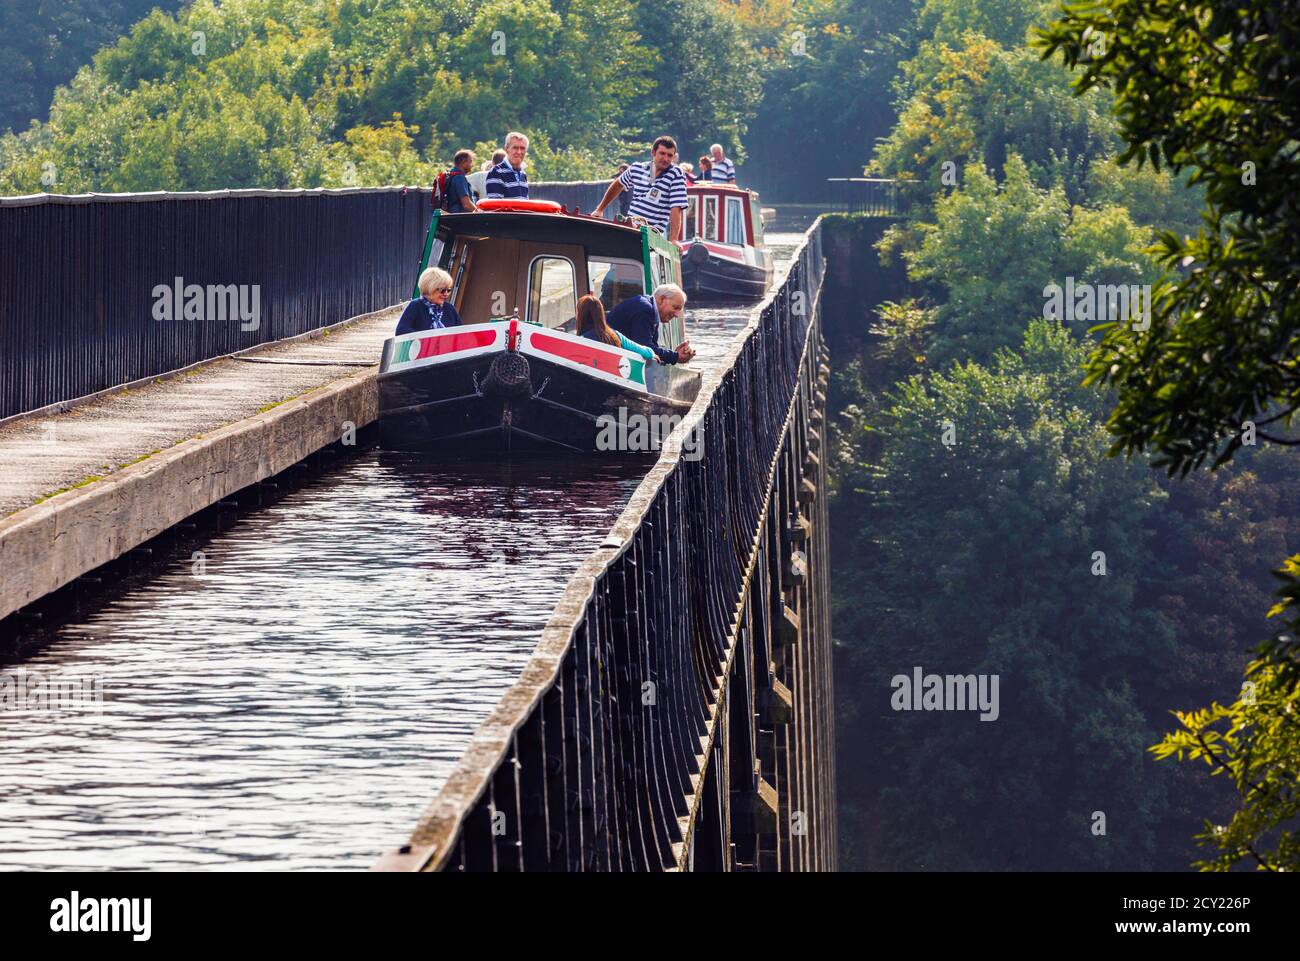 Llangollen, Denbighshire, Wales, United Kingdom.  The three hundred meters long Pontcysyllte Aqueduct which carries the Llangollen canal across the De Stock Photo